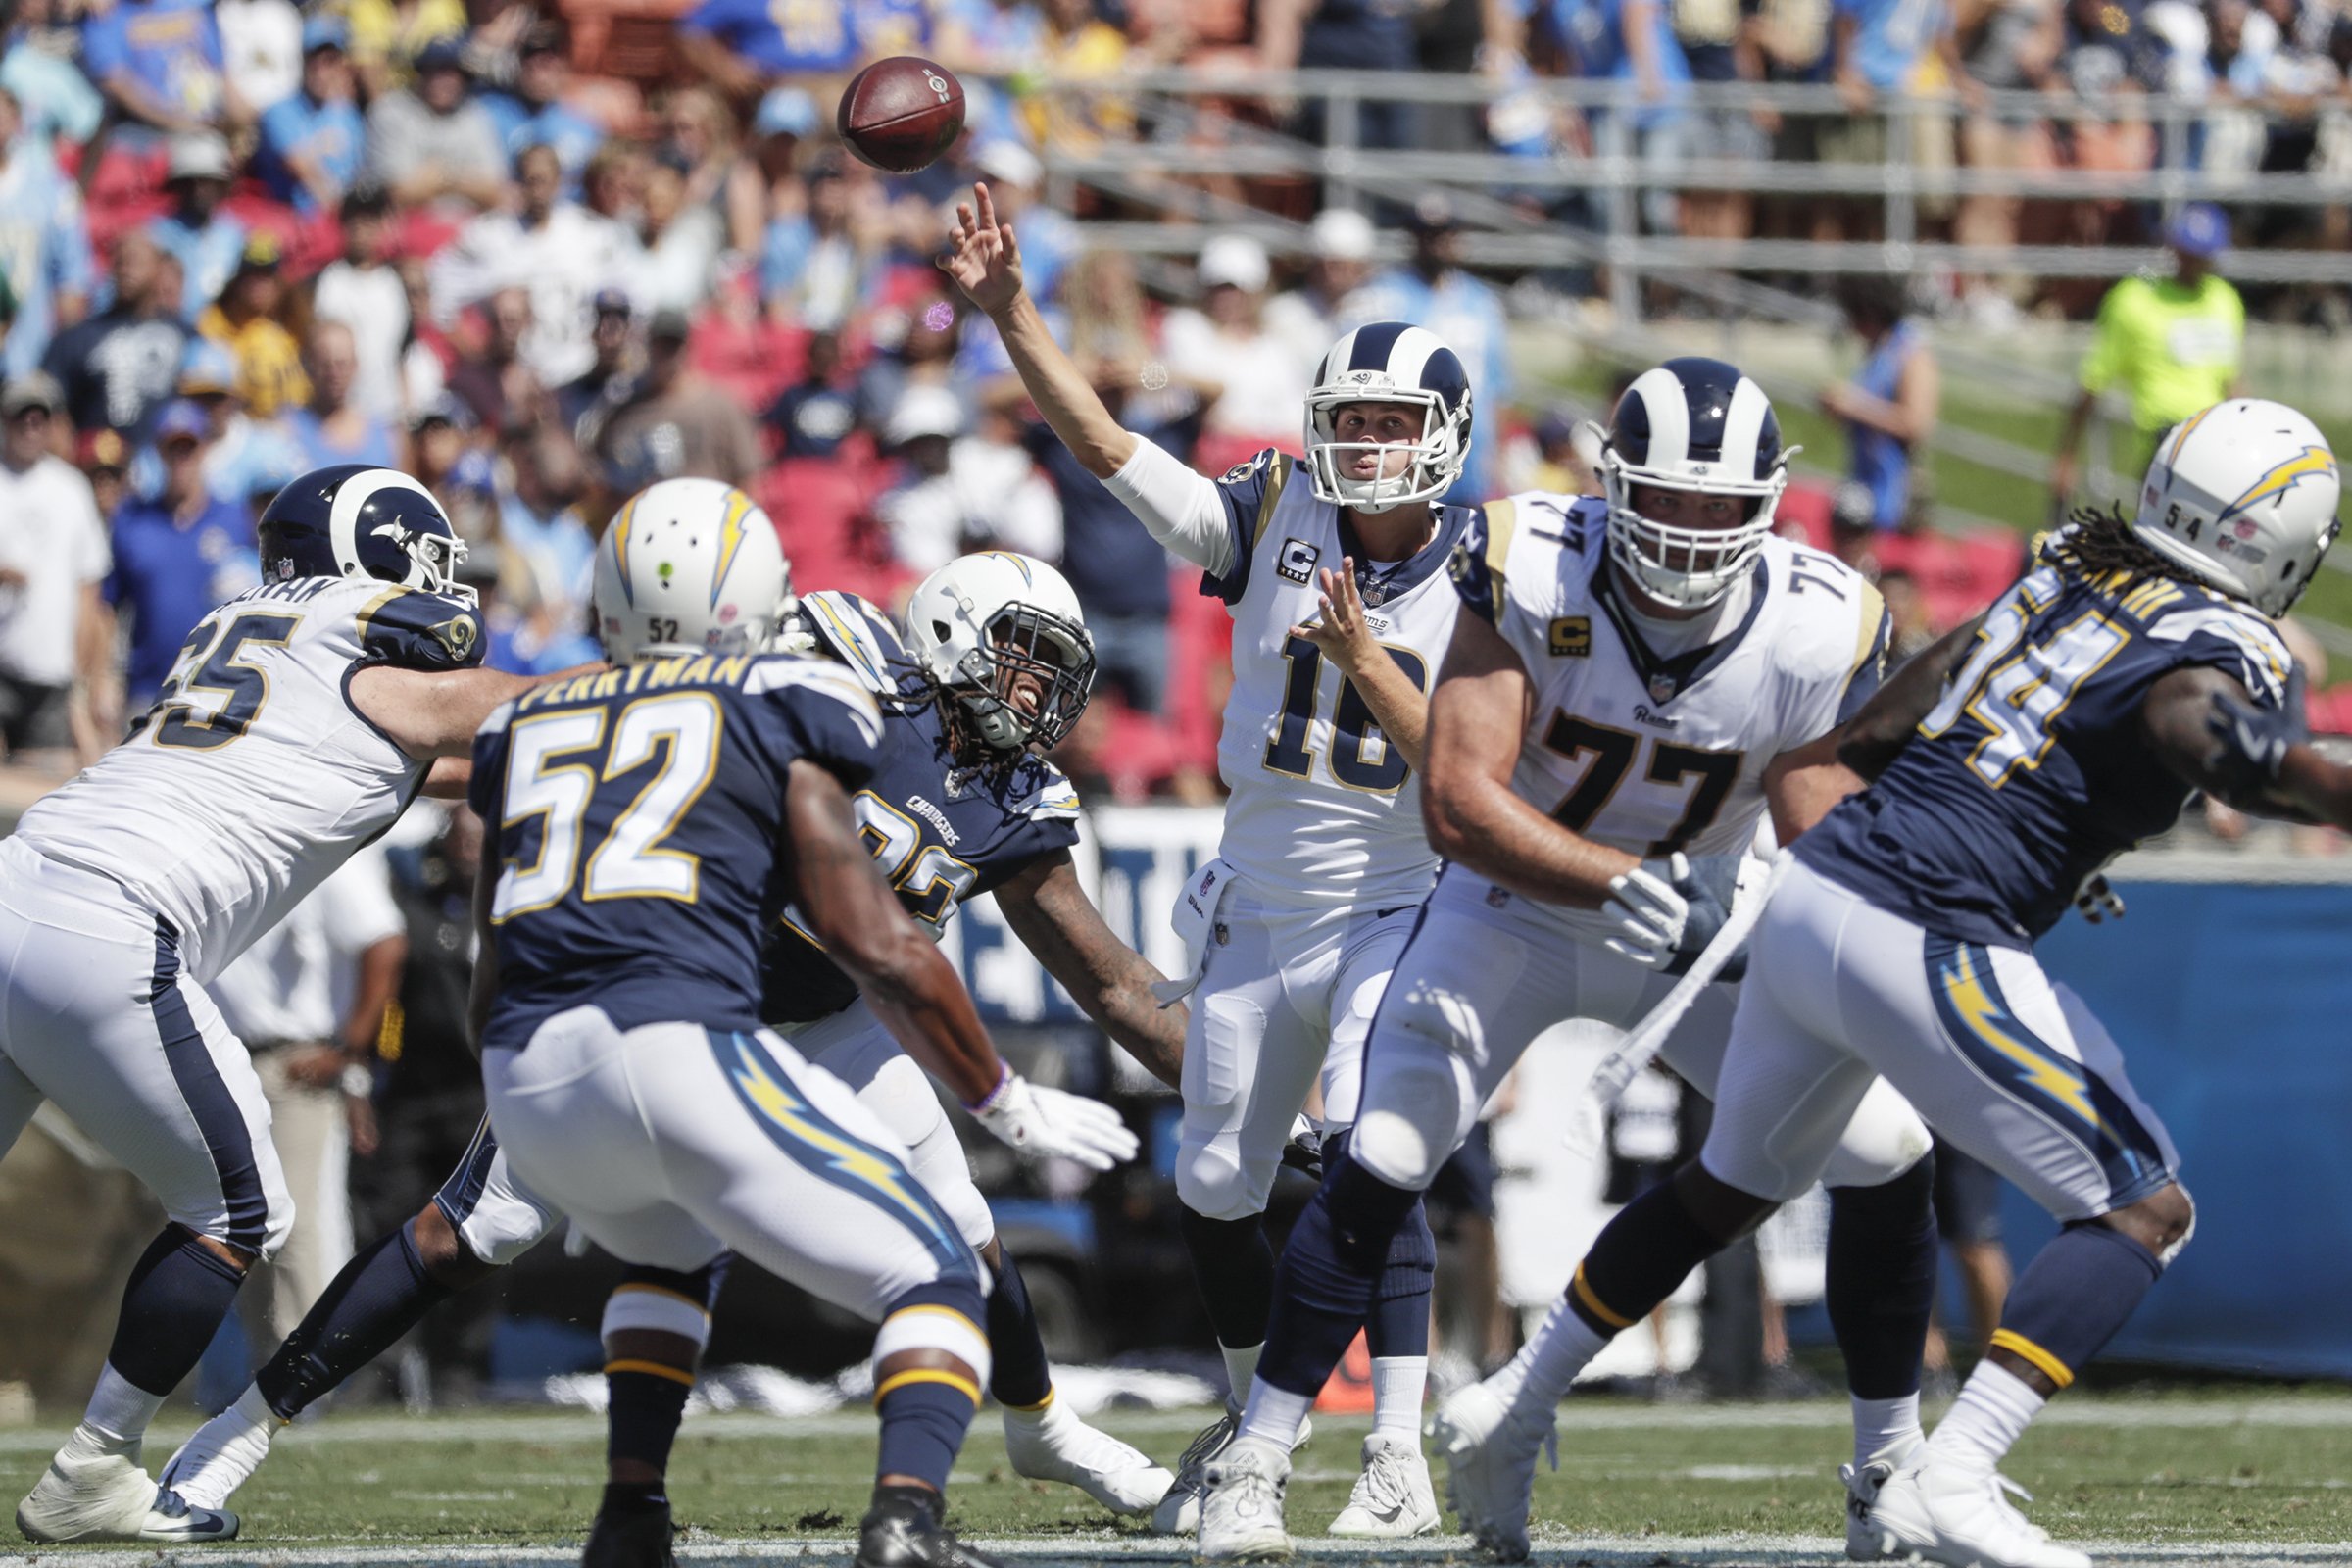 The Los Angeles Rams play football against the Chargers